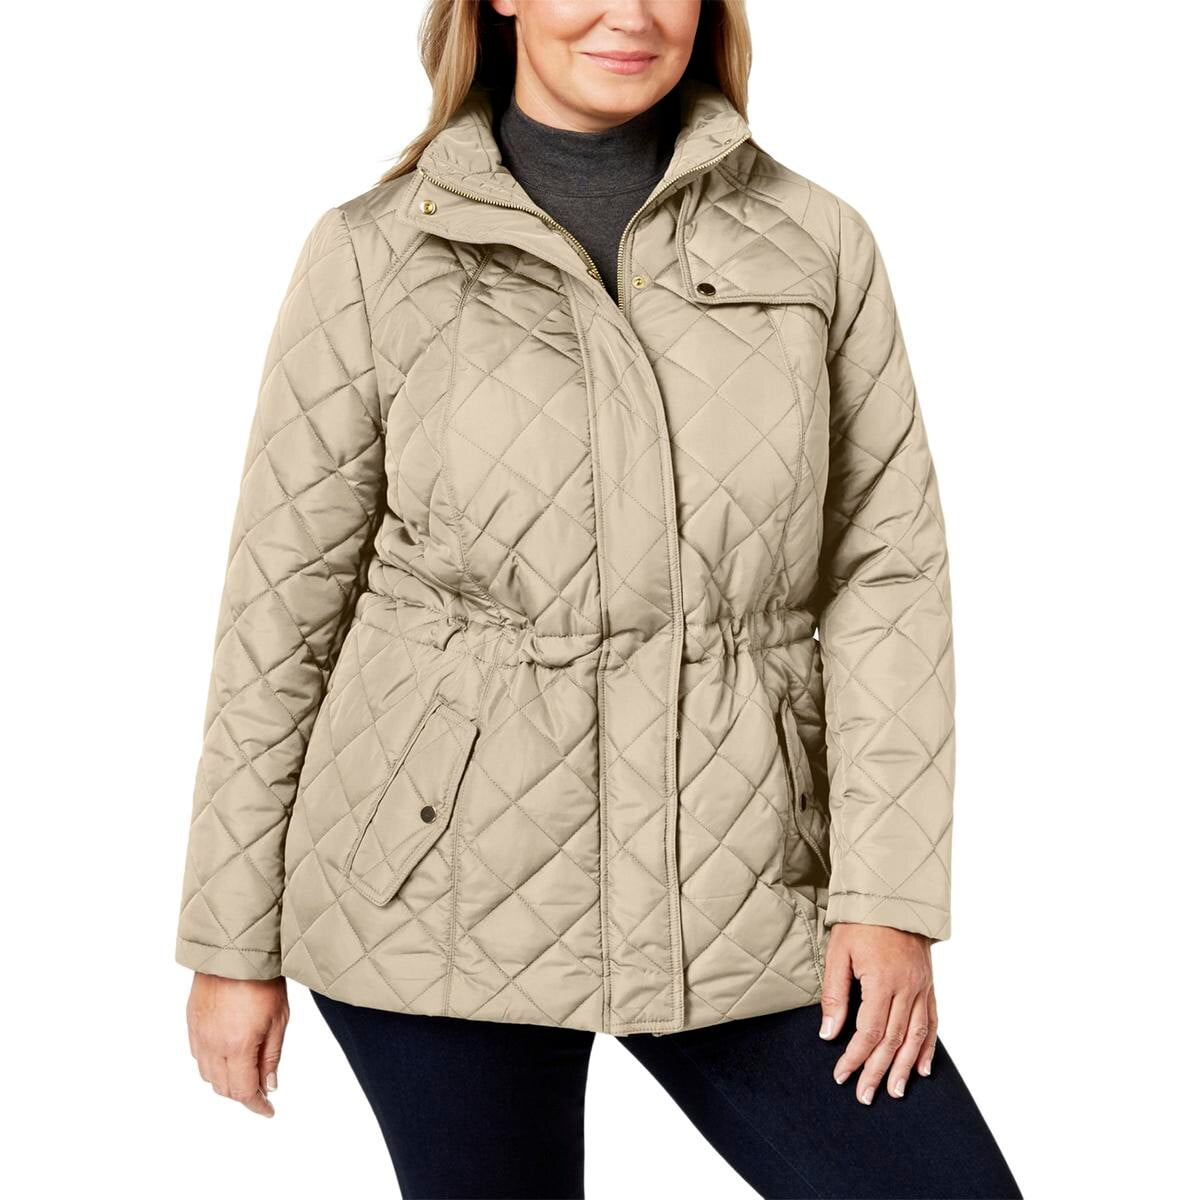 Charter Club | Quilted Zip-Front Jacket | Tan | Size 0X Plus - Walmart.com